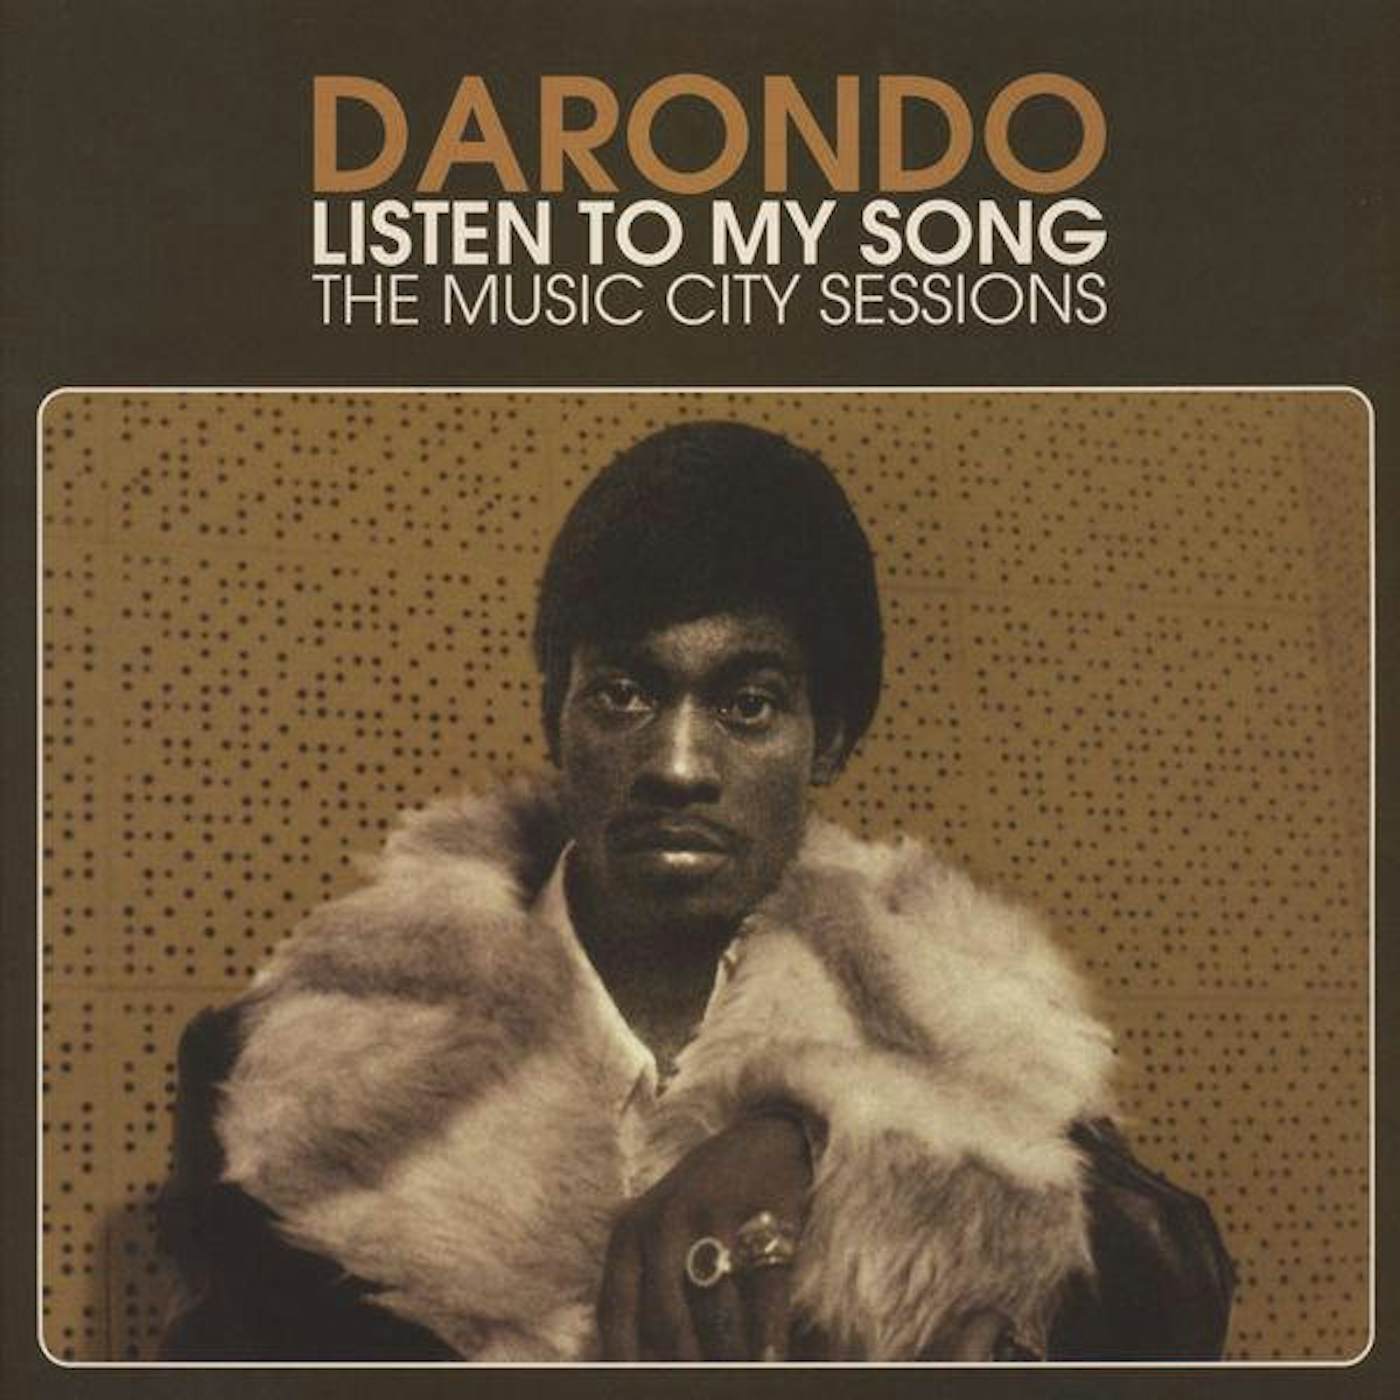 Darondo LISTEN TO MY SONG: MUSIC CITY SESSIONS Vinyl Record